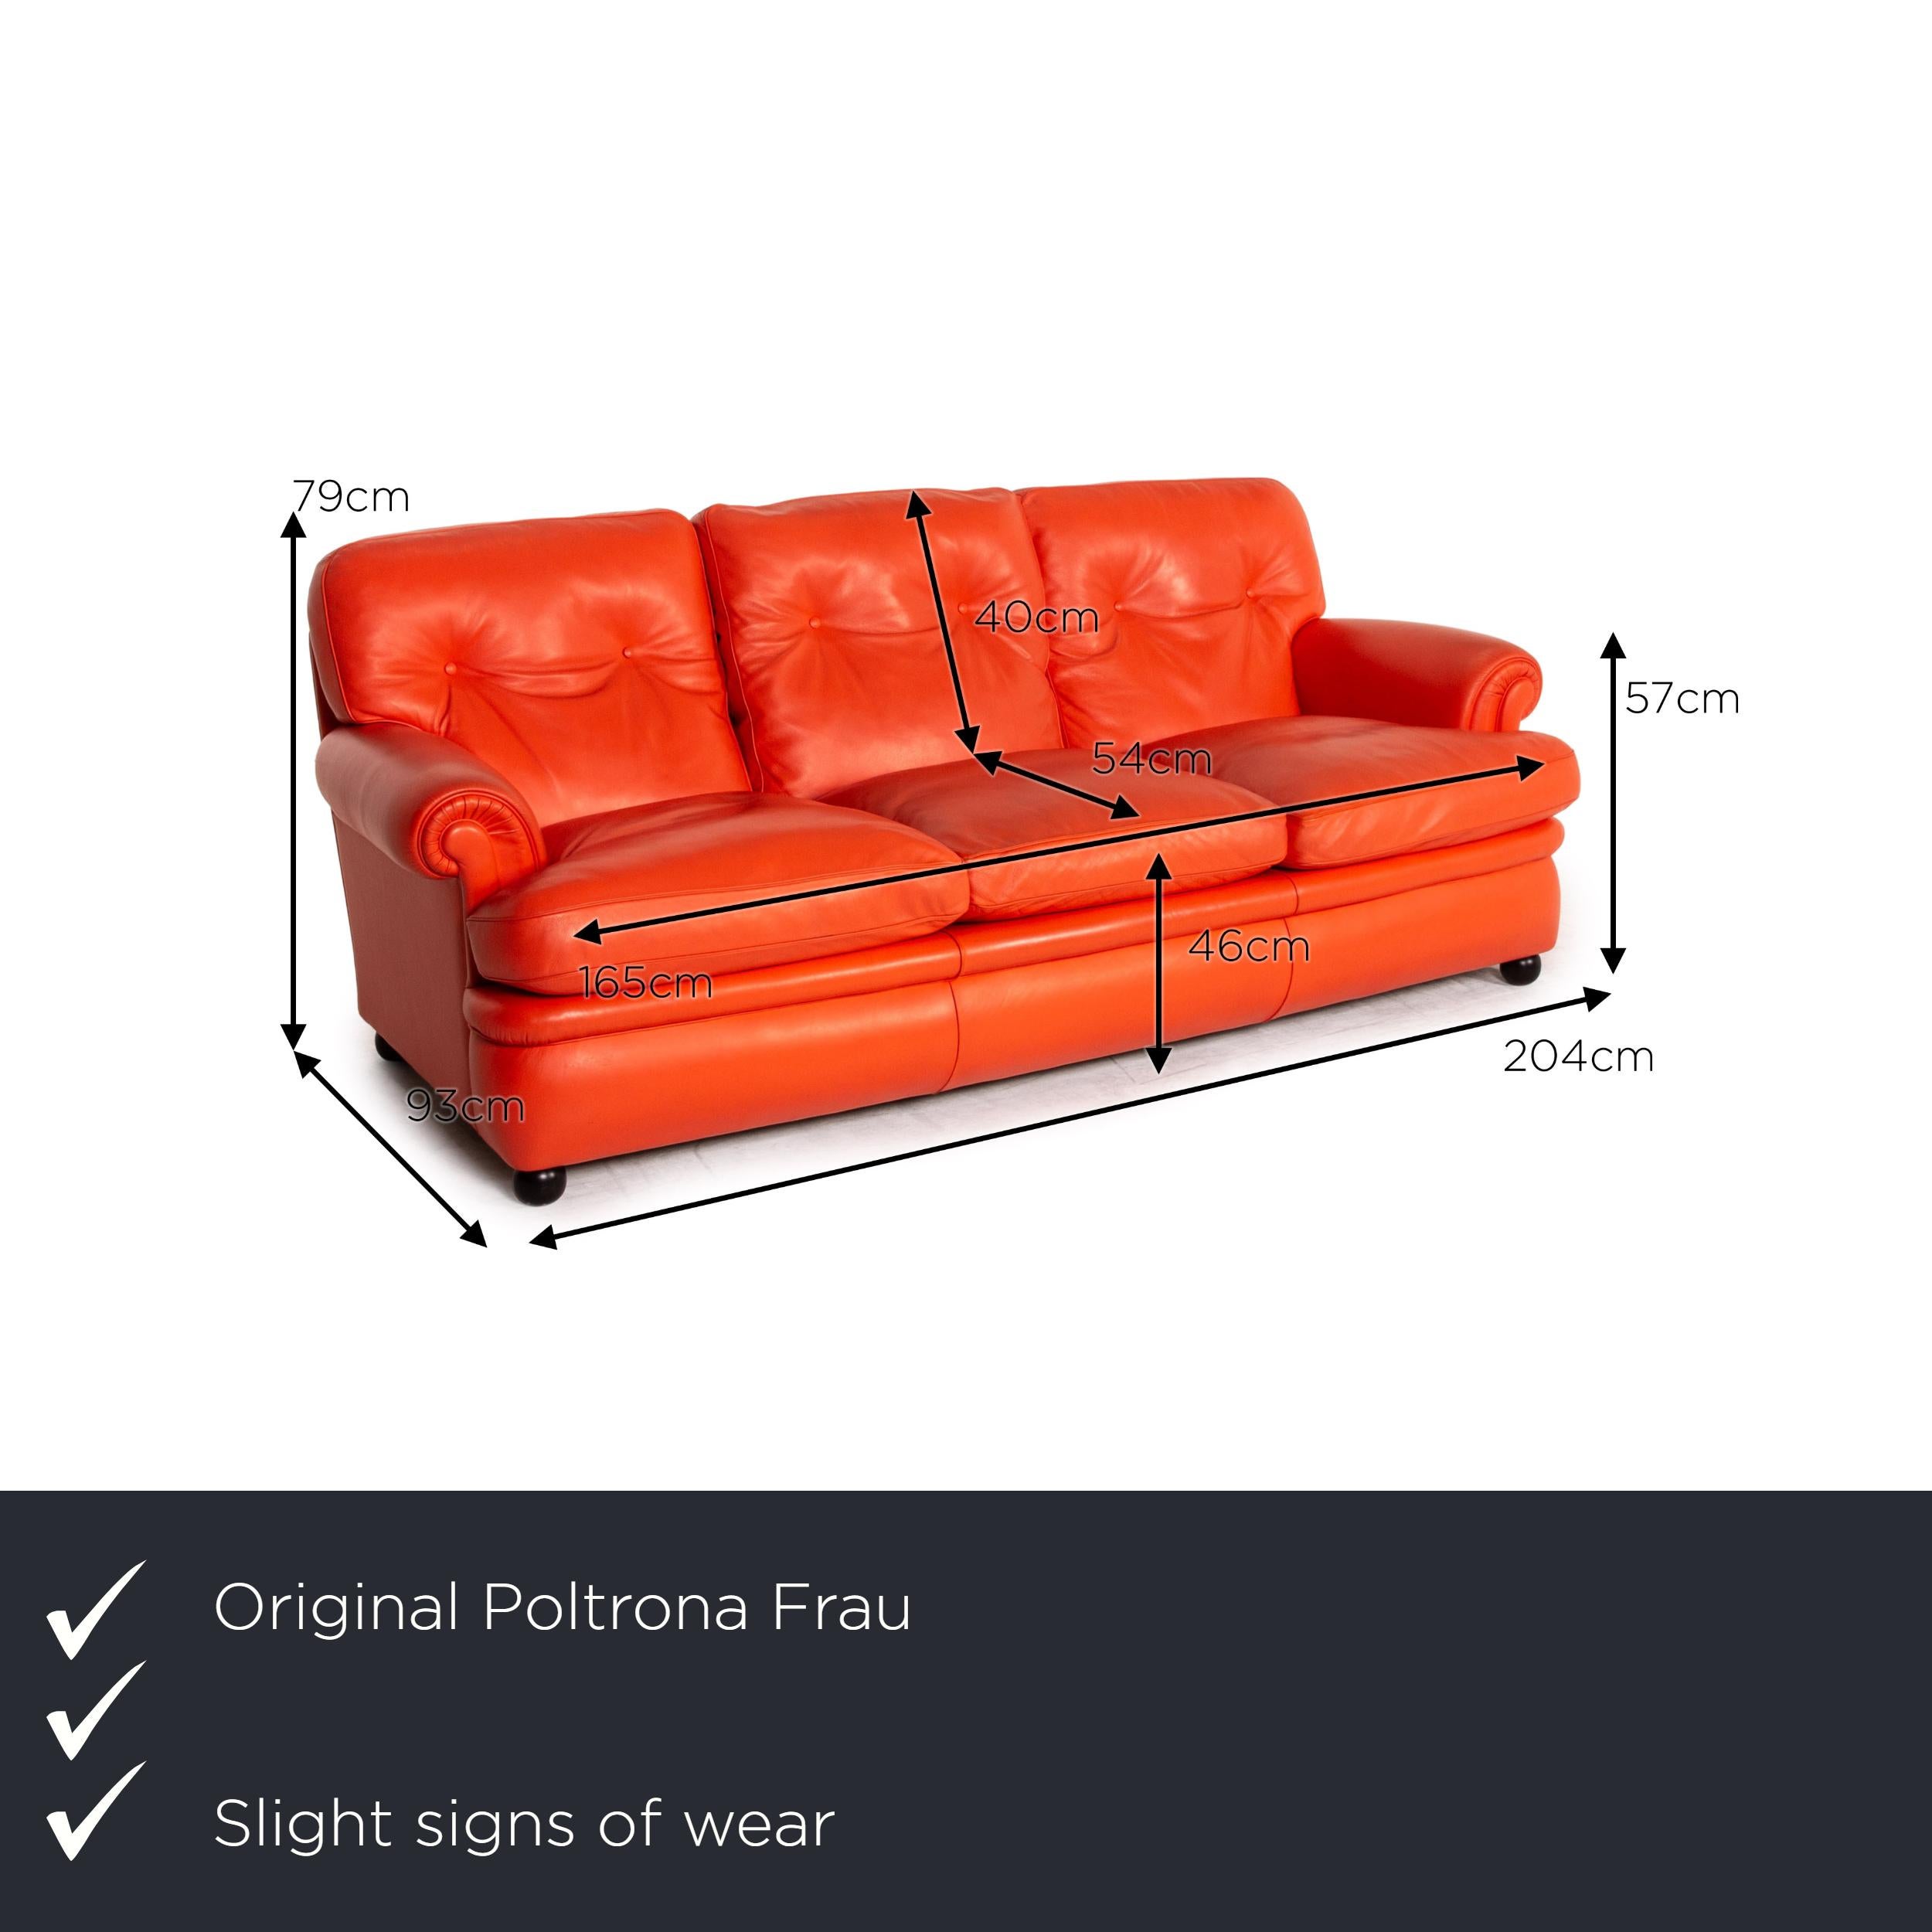 We present to you a Poltrona Frau dream on leather sofa coral orange chesterfield sofa couch.

Product measurements in centimeters:

Depth 93
Width 204
Height 79
Seat height 46
Rest height 57
Seat depth 54
Seat width 165
Back height